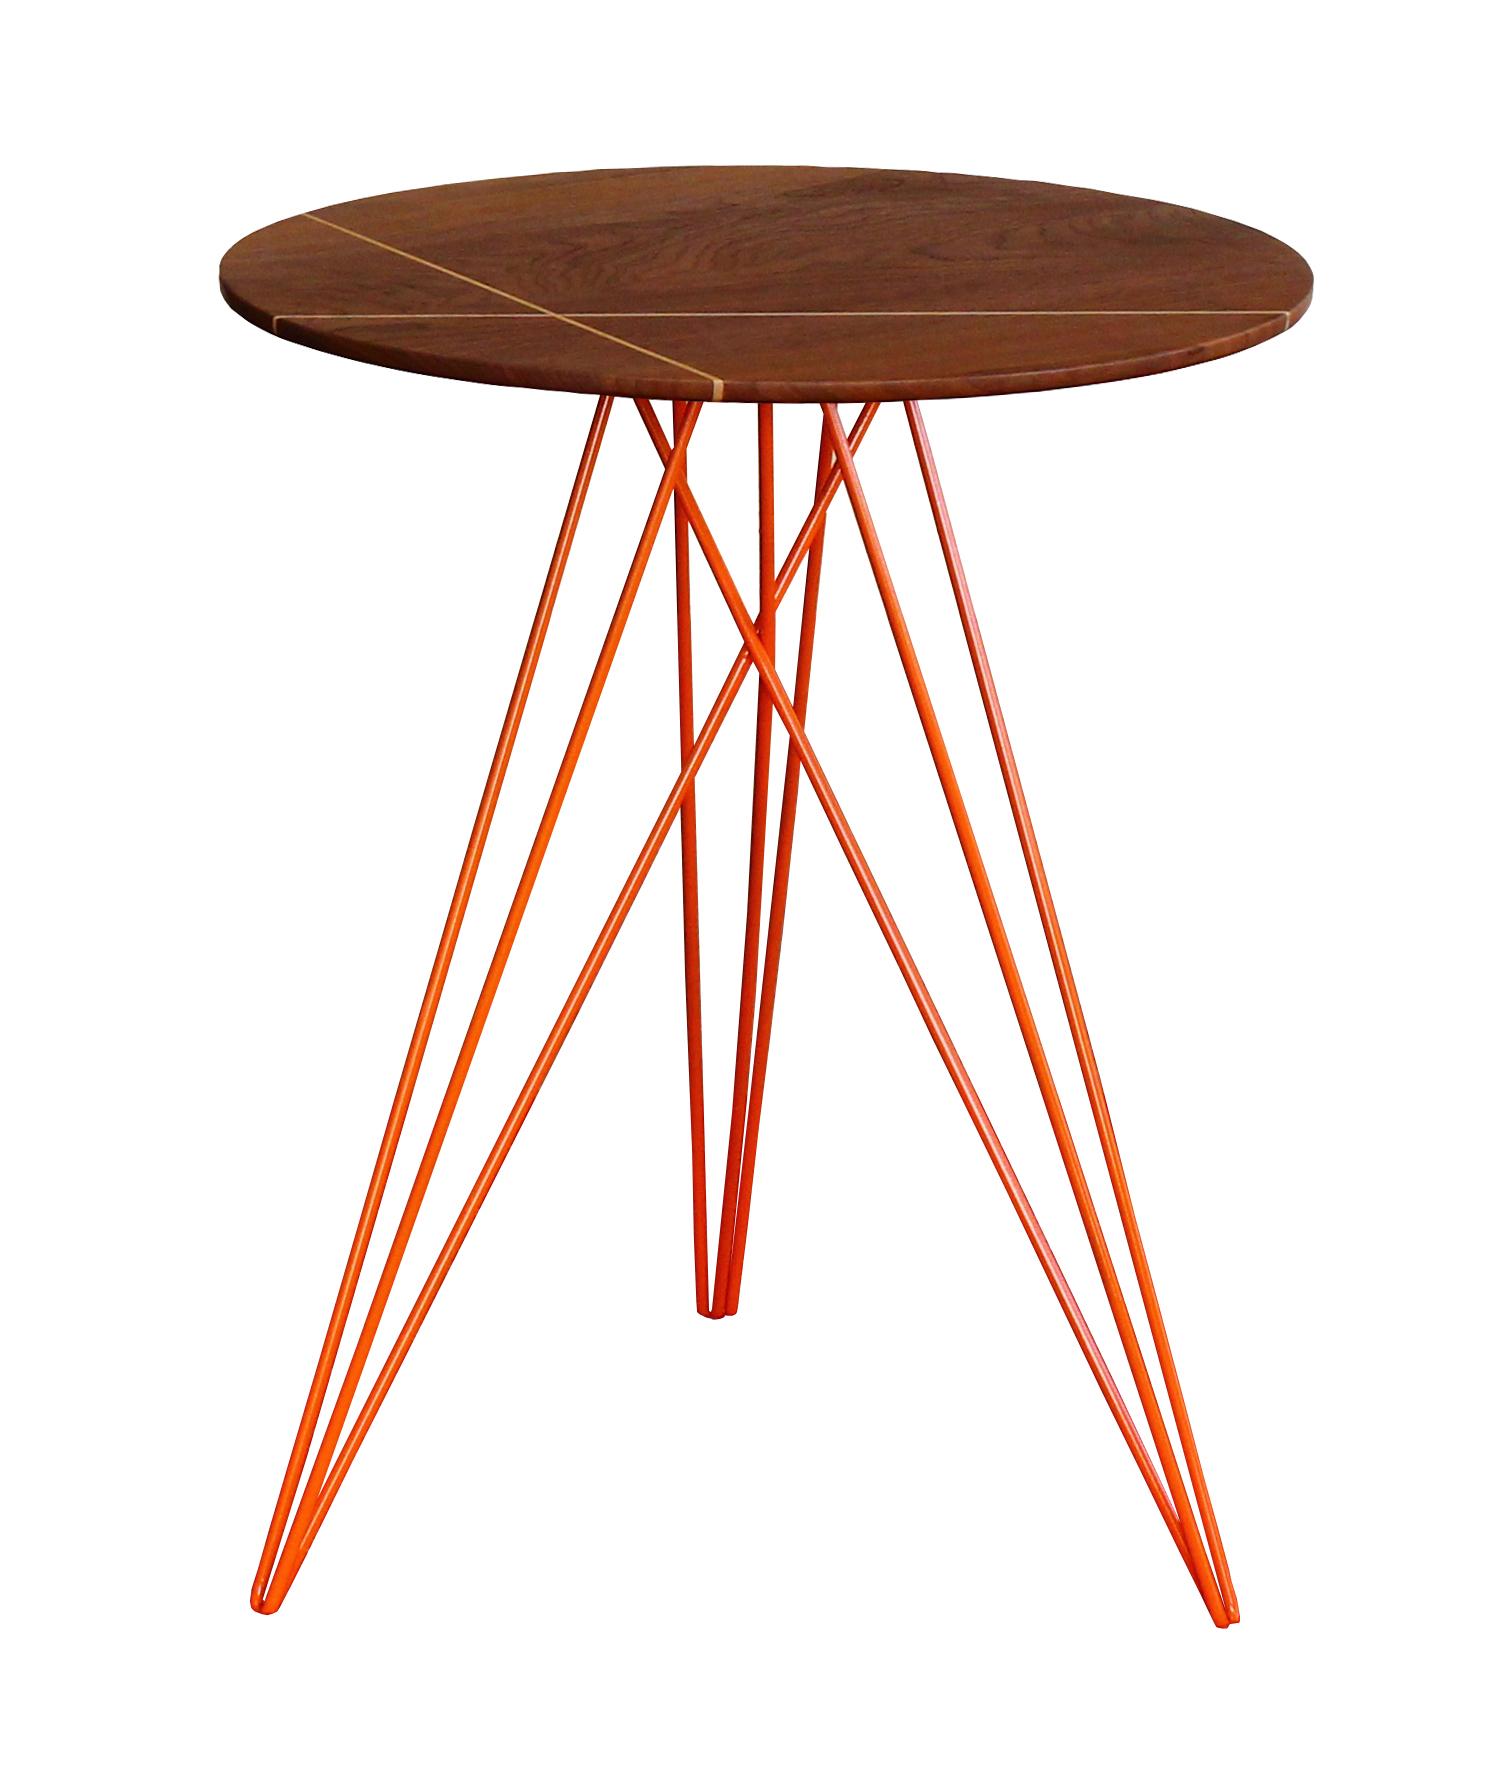 American Hudson Hairpin Side Table with Wood Inlay Walnut Orange For Sale